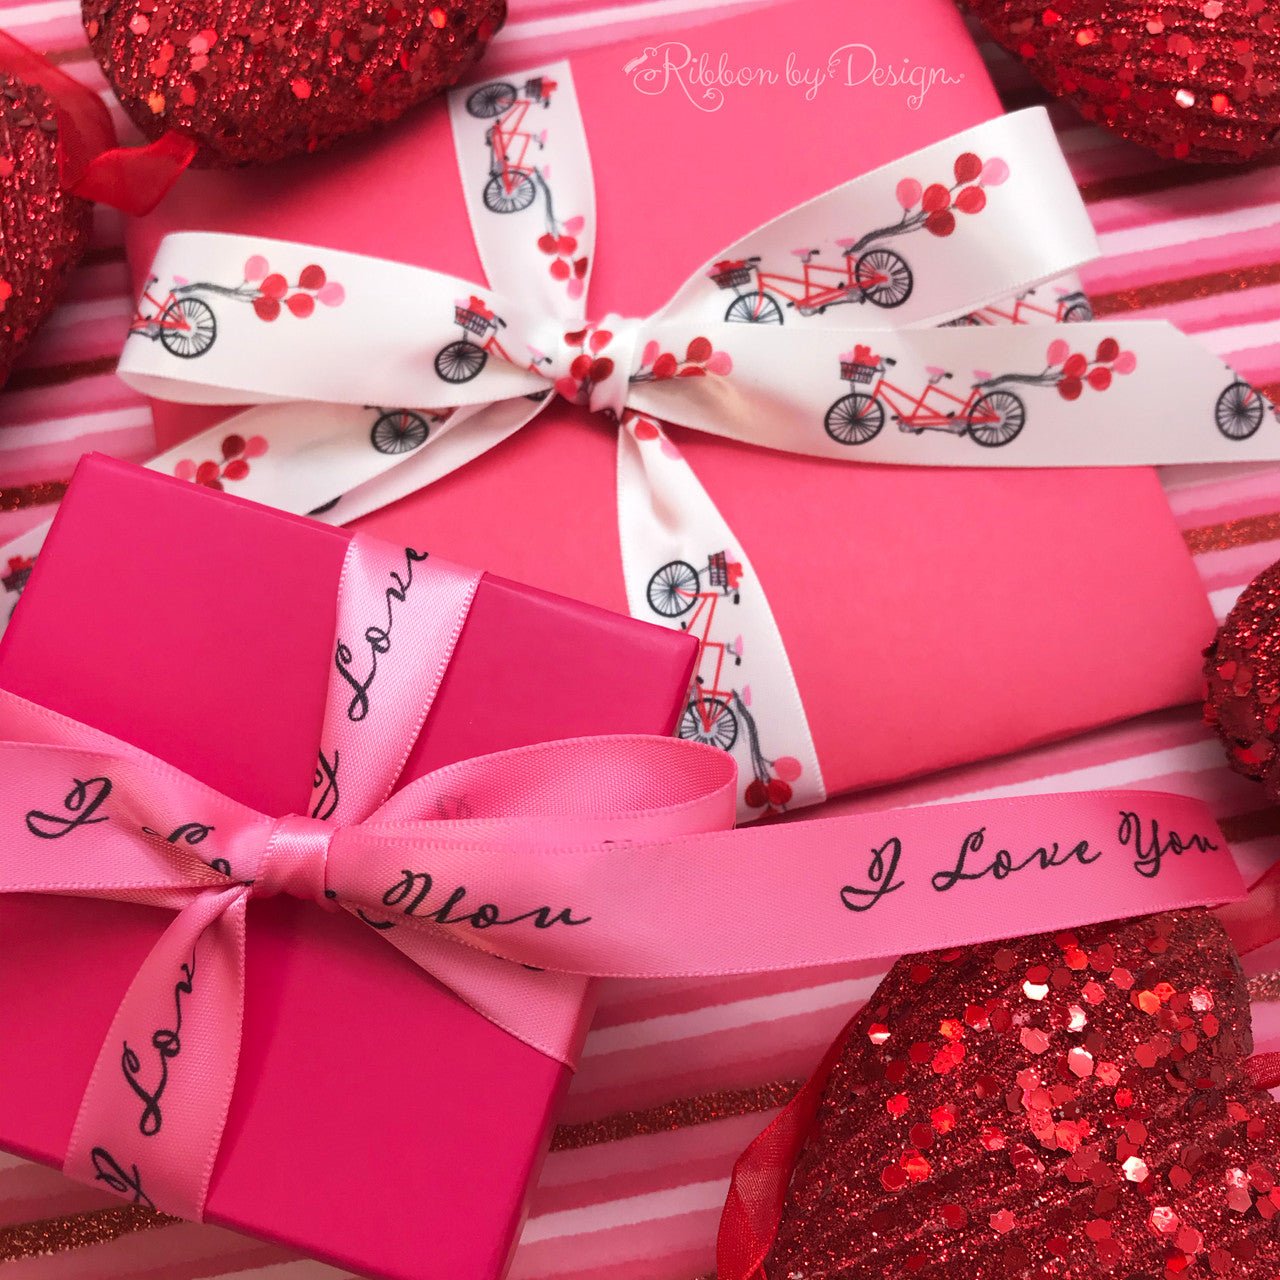 Mix and match our Valentine bicycle ribbon with I Love You ribbon for the perfect touch of love and whimsy on your Valentine gifts!